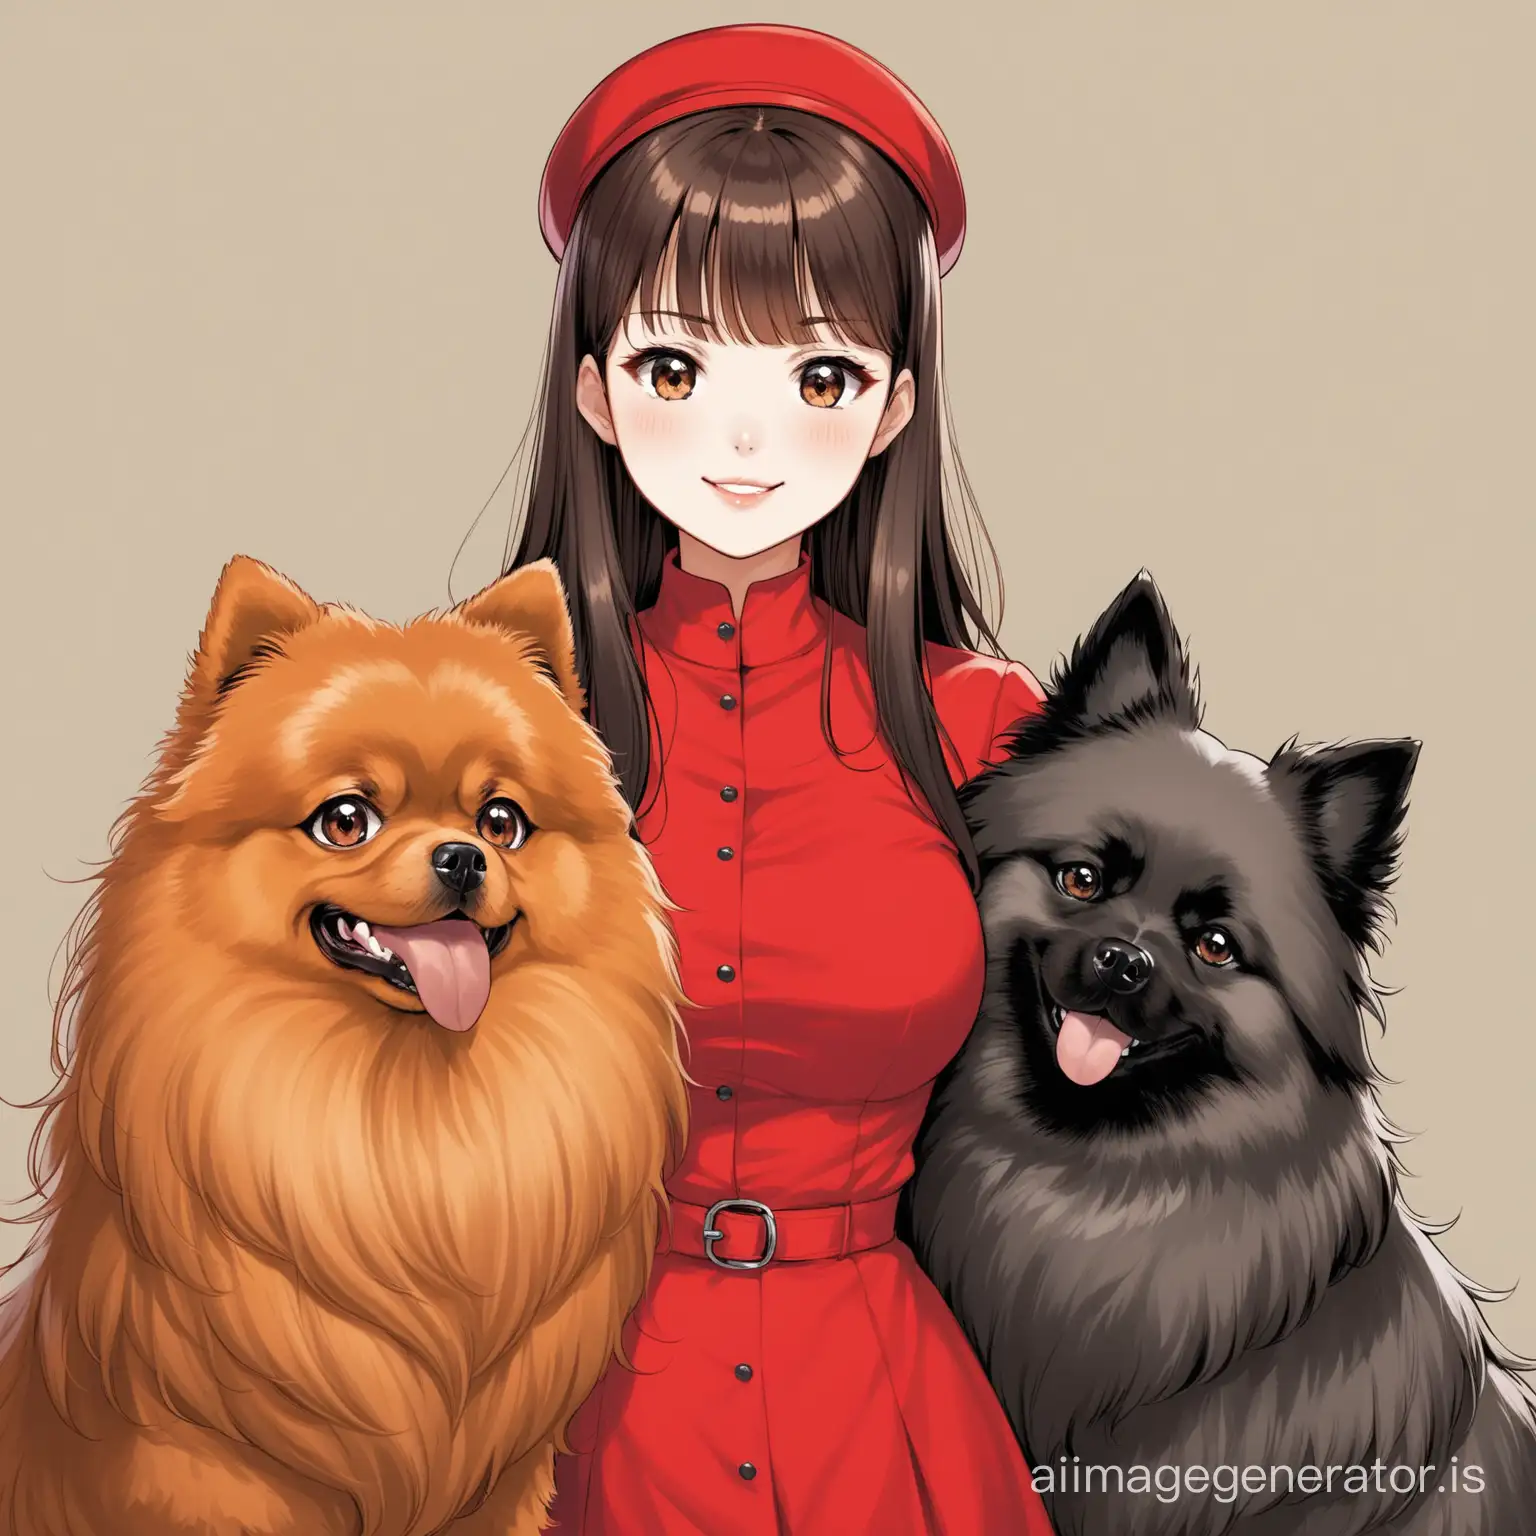 The woman with bangs and two dogs, a red Pomeranian and a Keeshond.